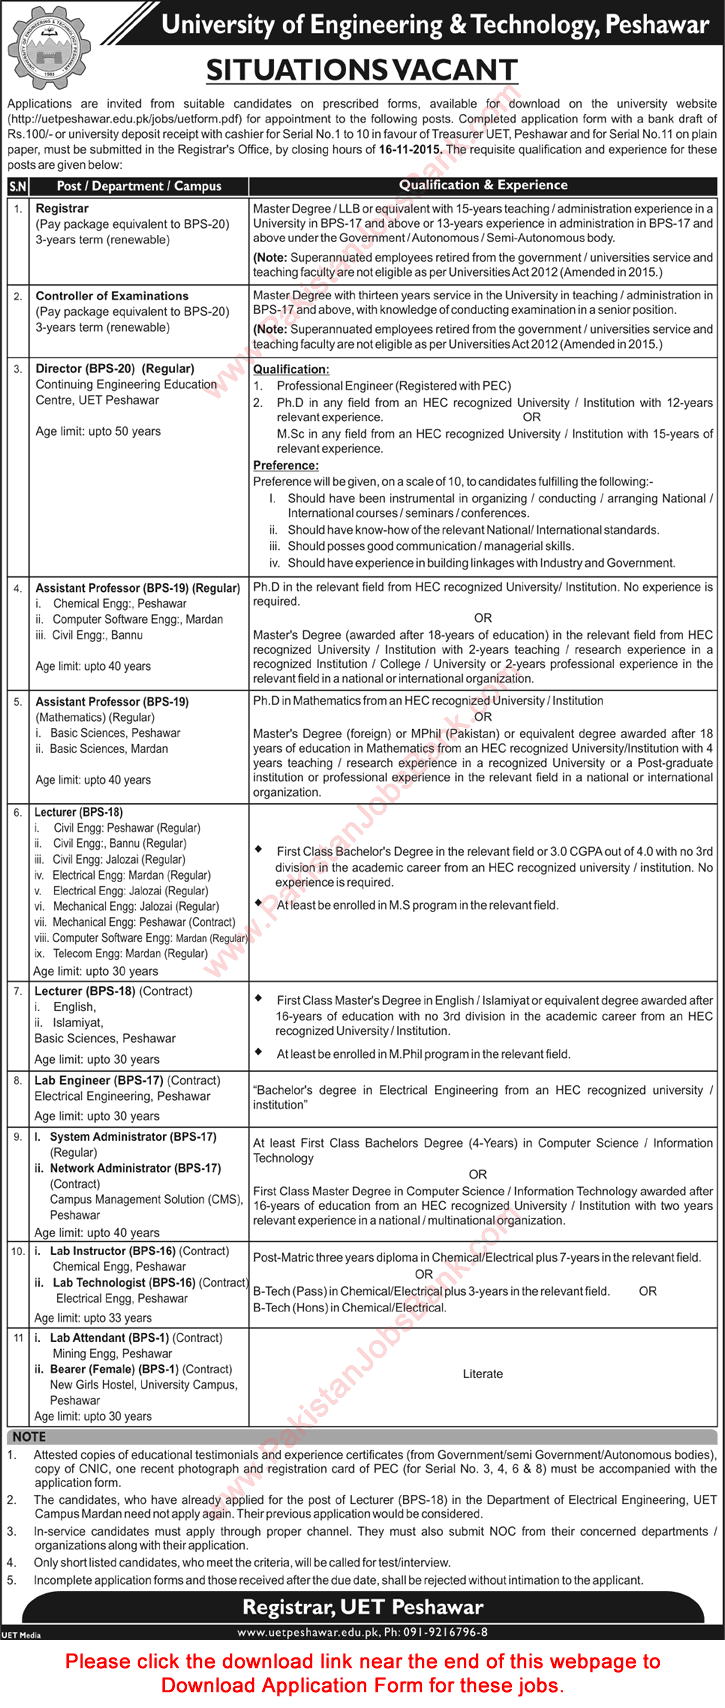 UET Peshawar Jobs October 2015 Application Form Download Teaching Faculty, Lab Engineers & Others